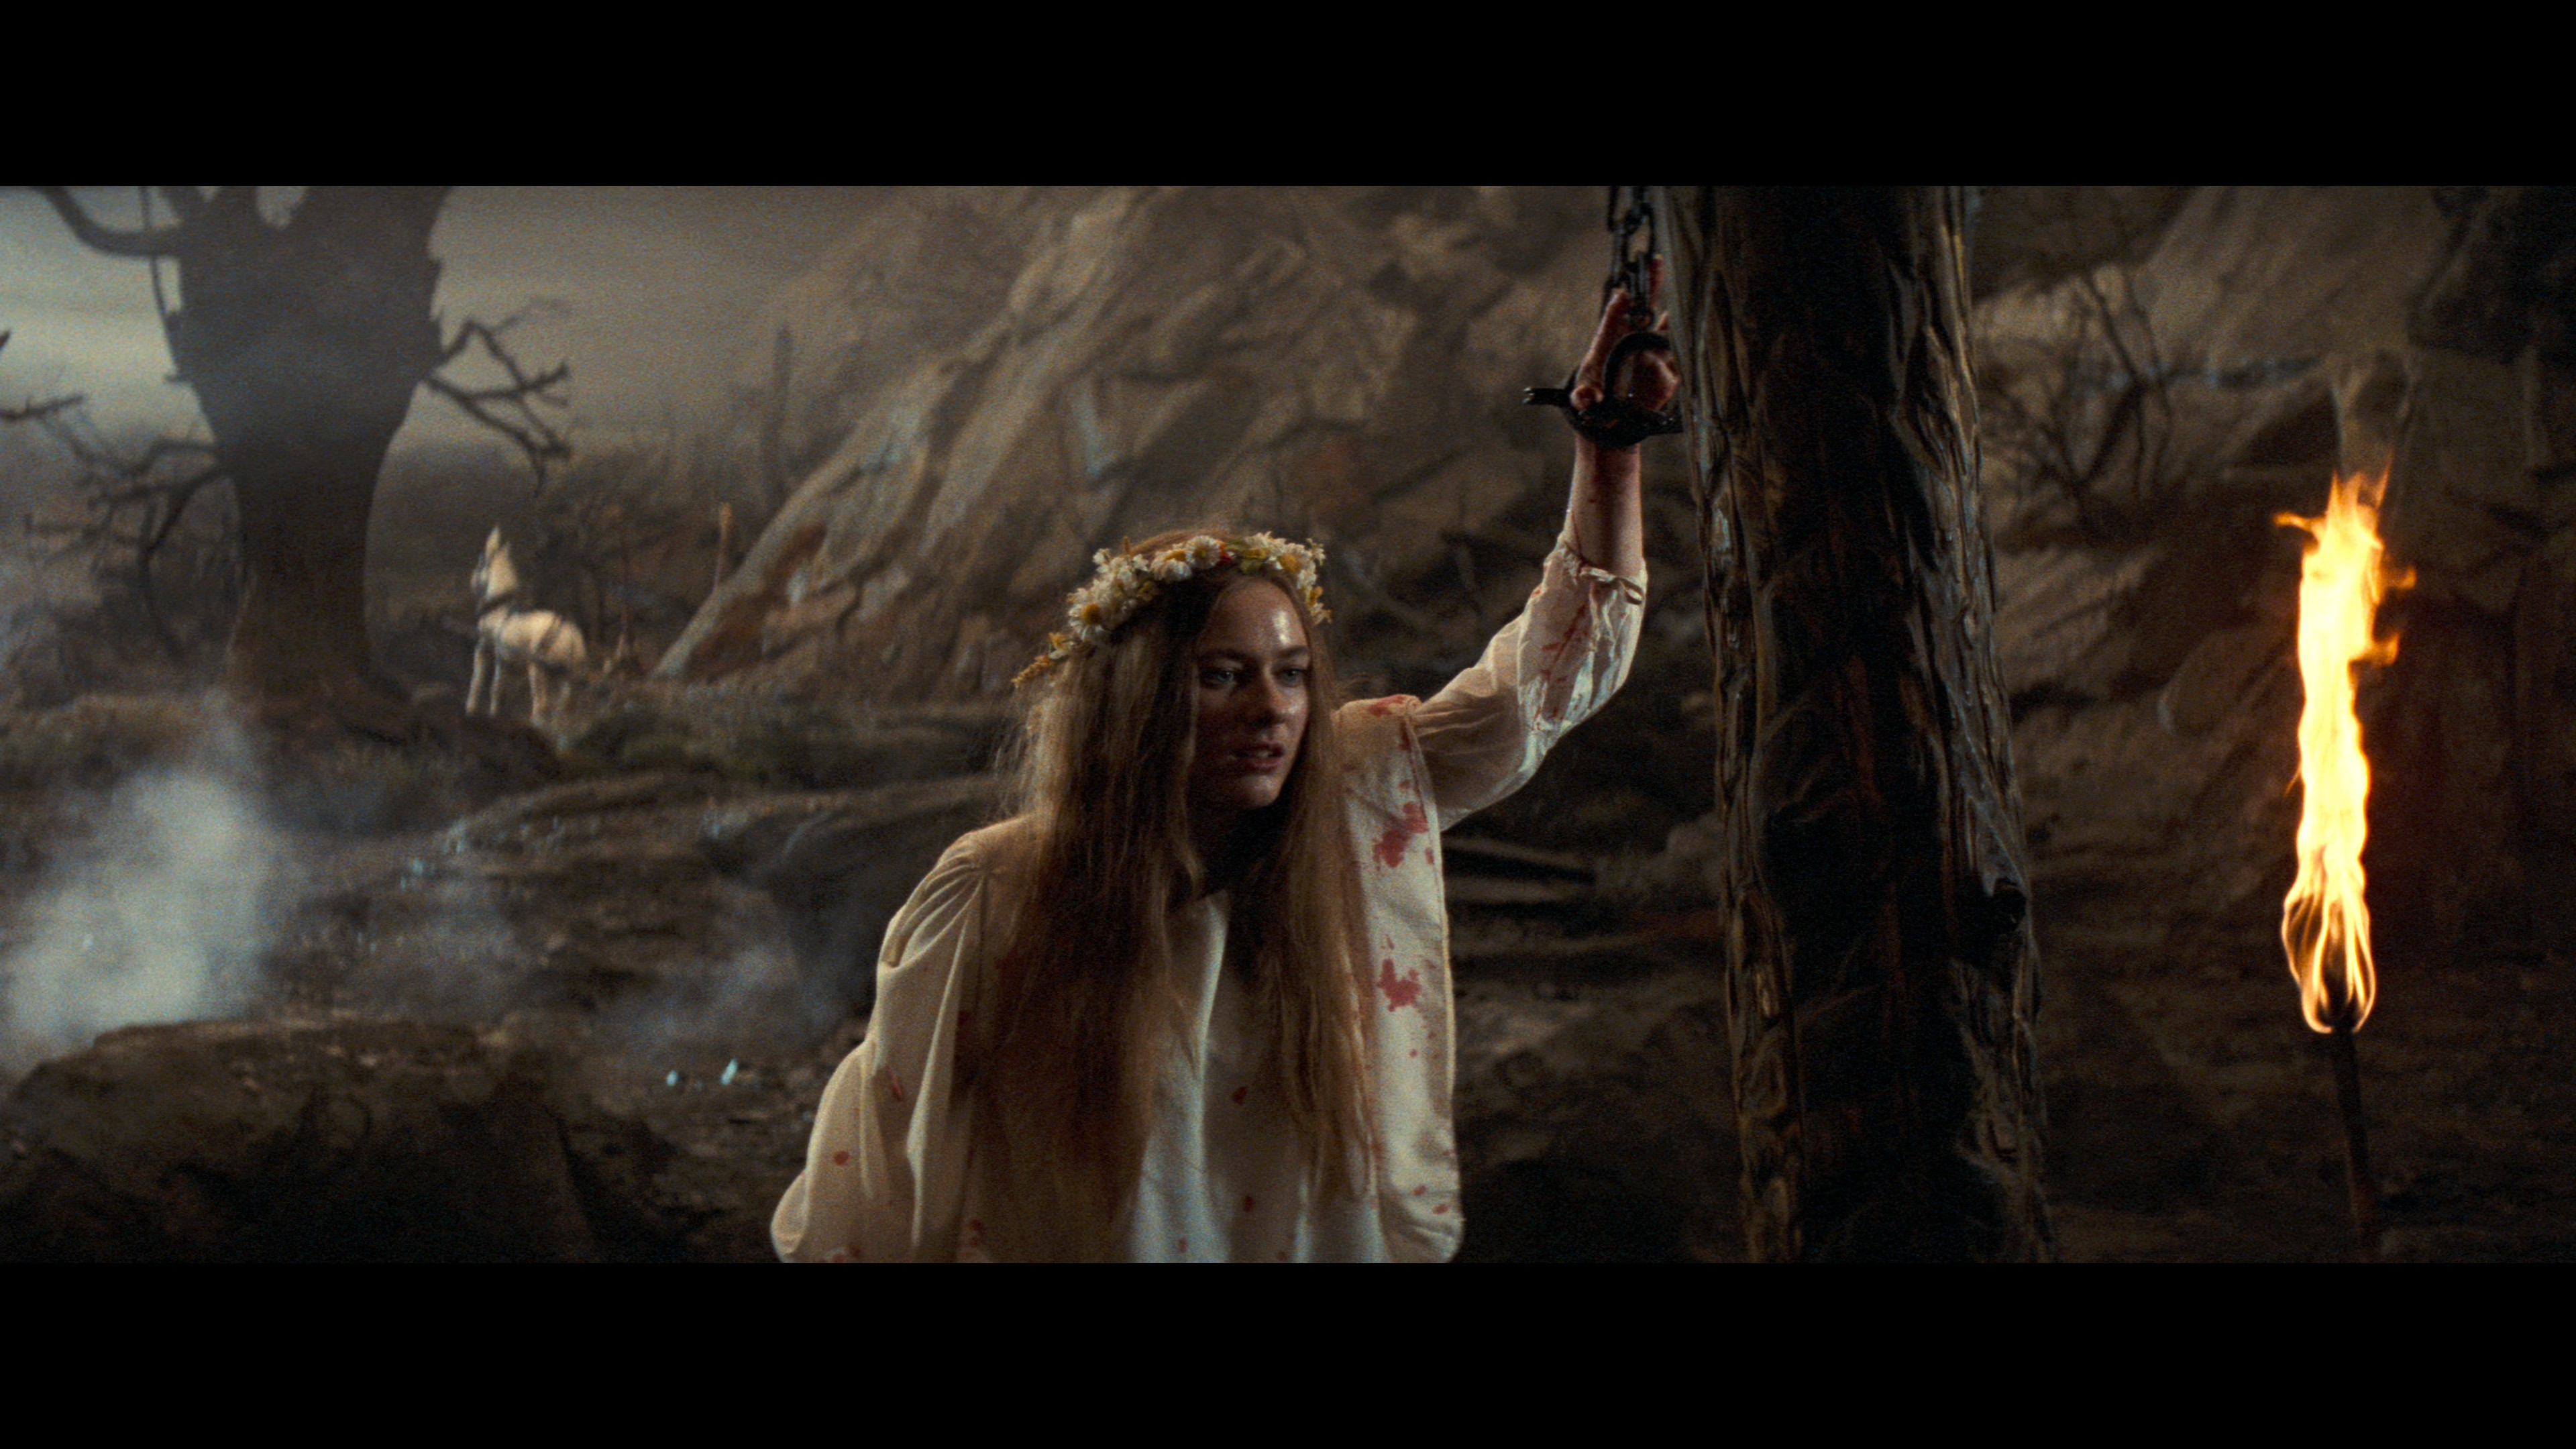 We Shall Live and the Beast Shall Die – Dragonslayer (1981) 4K Ultra HD –  The Video File Blog